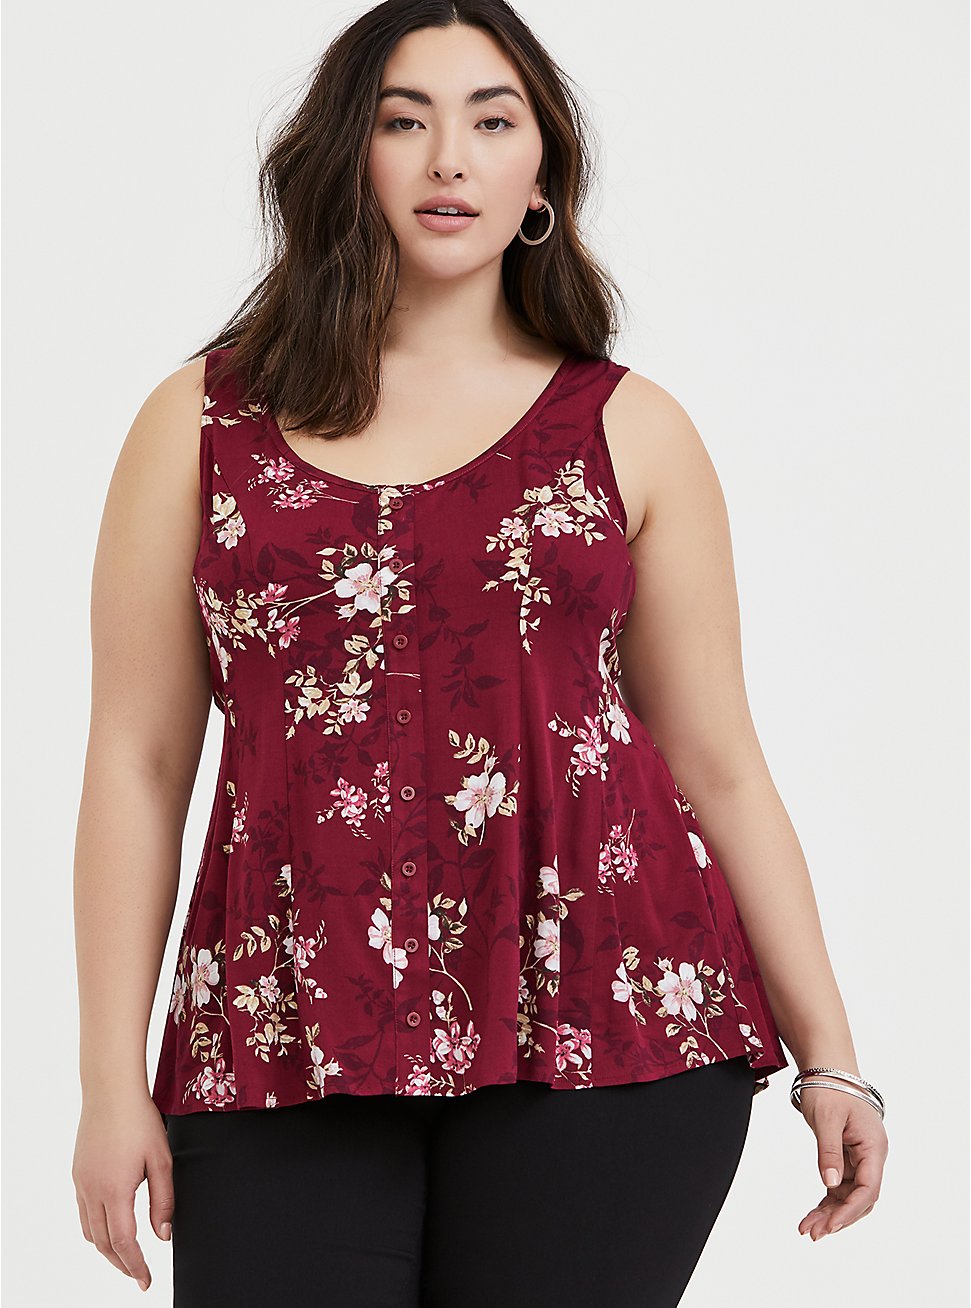 Plus Size - Red Wine Floral Challis Fit & Flare Tank - Torrid